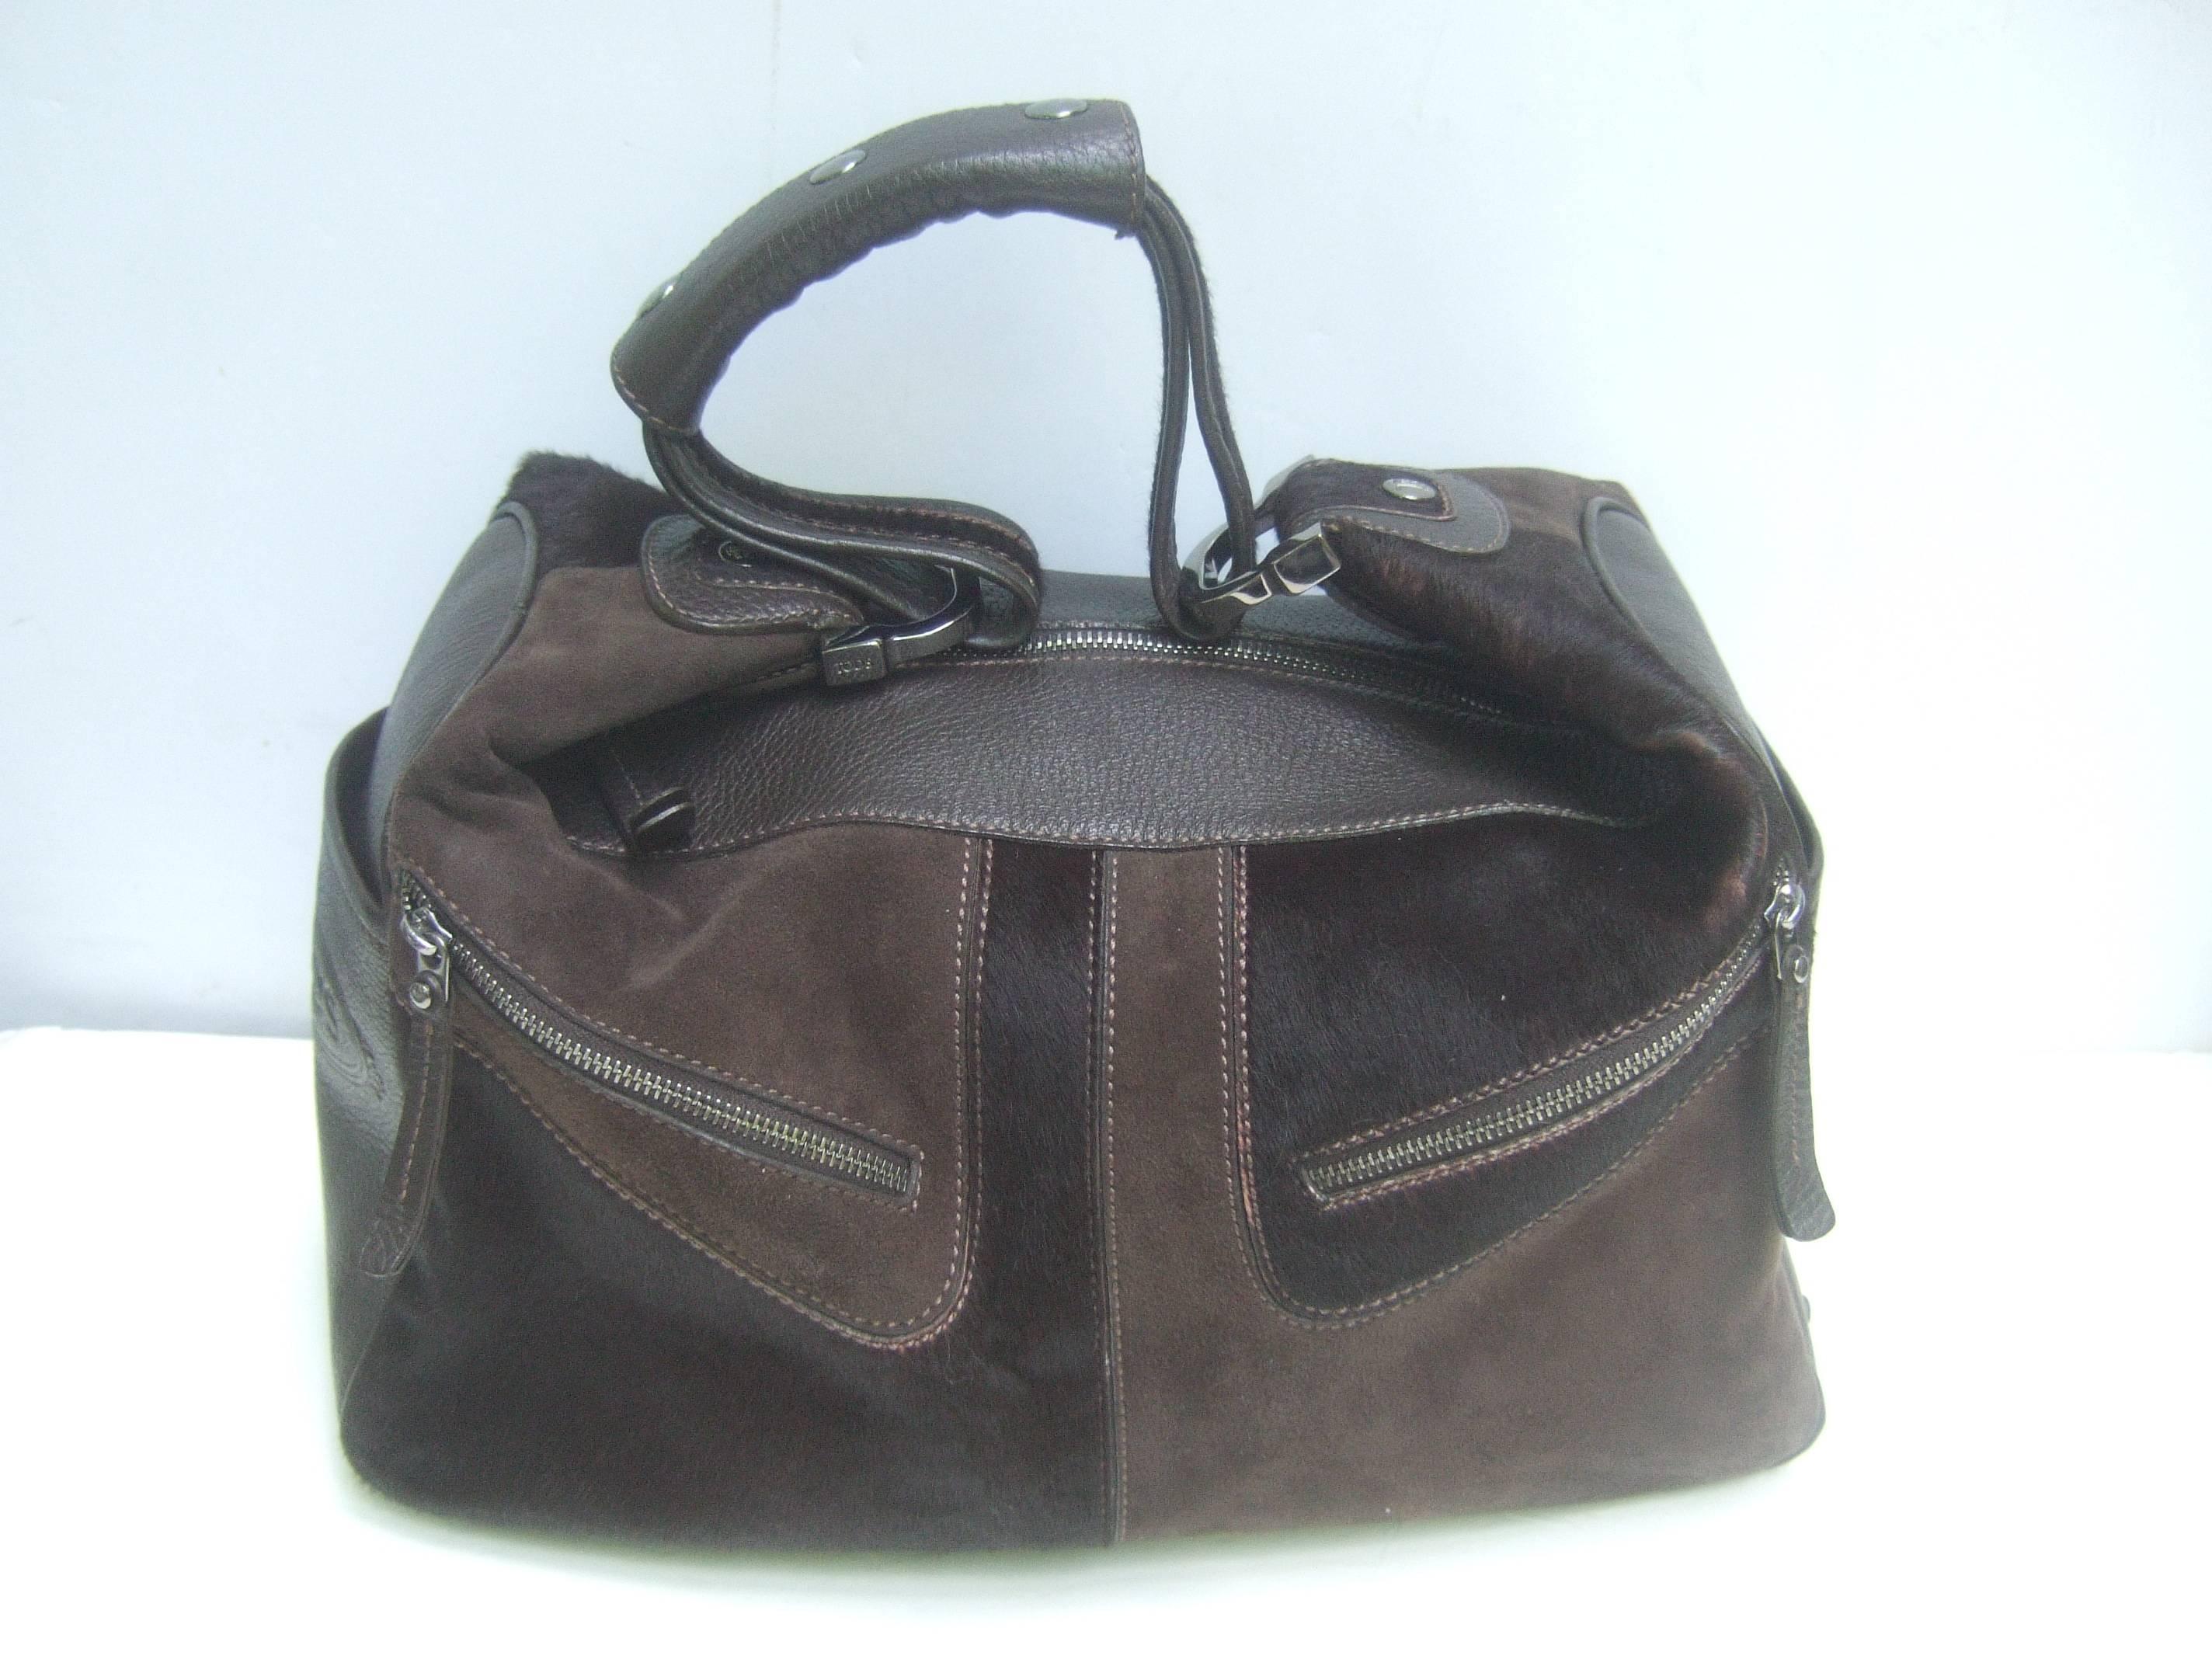 pony brand leather bags